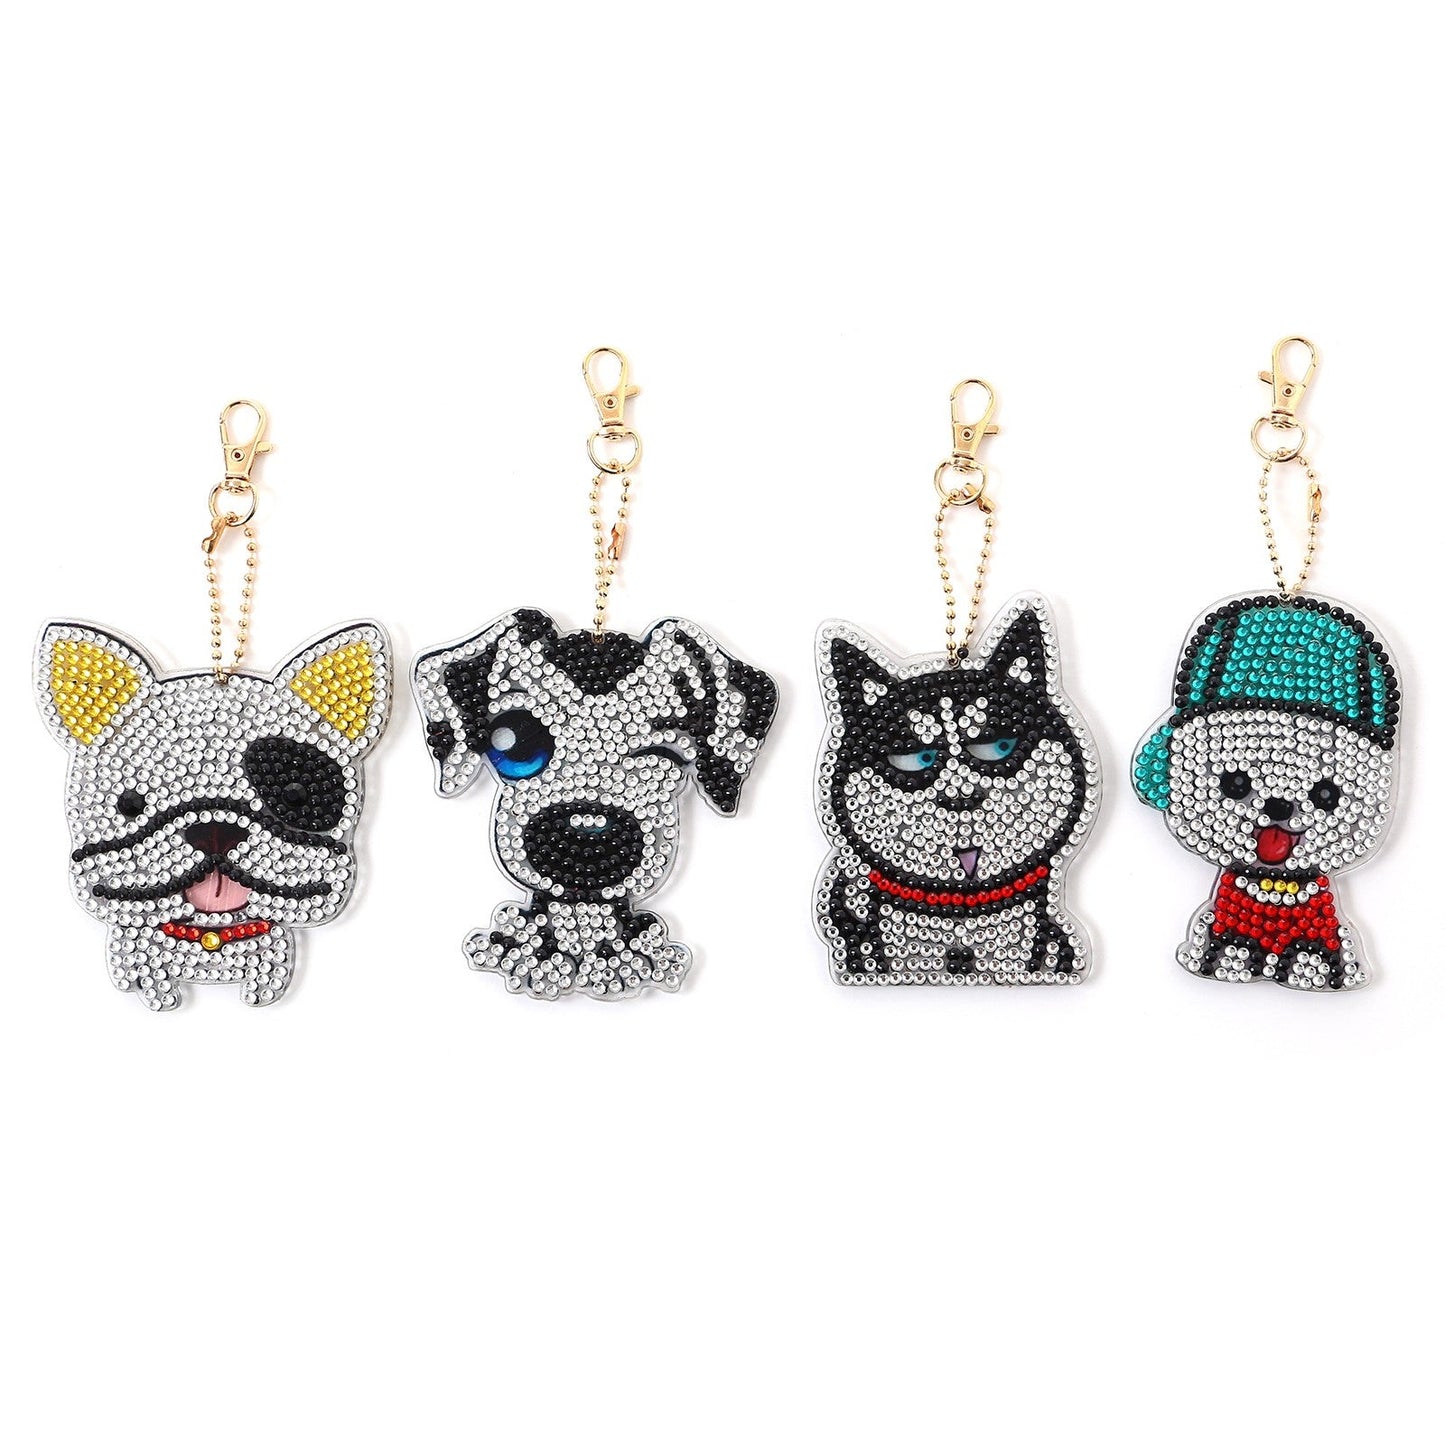 Blingbling's Keychain | Dog | Four Piece Set